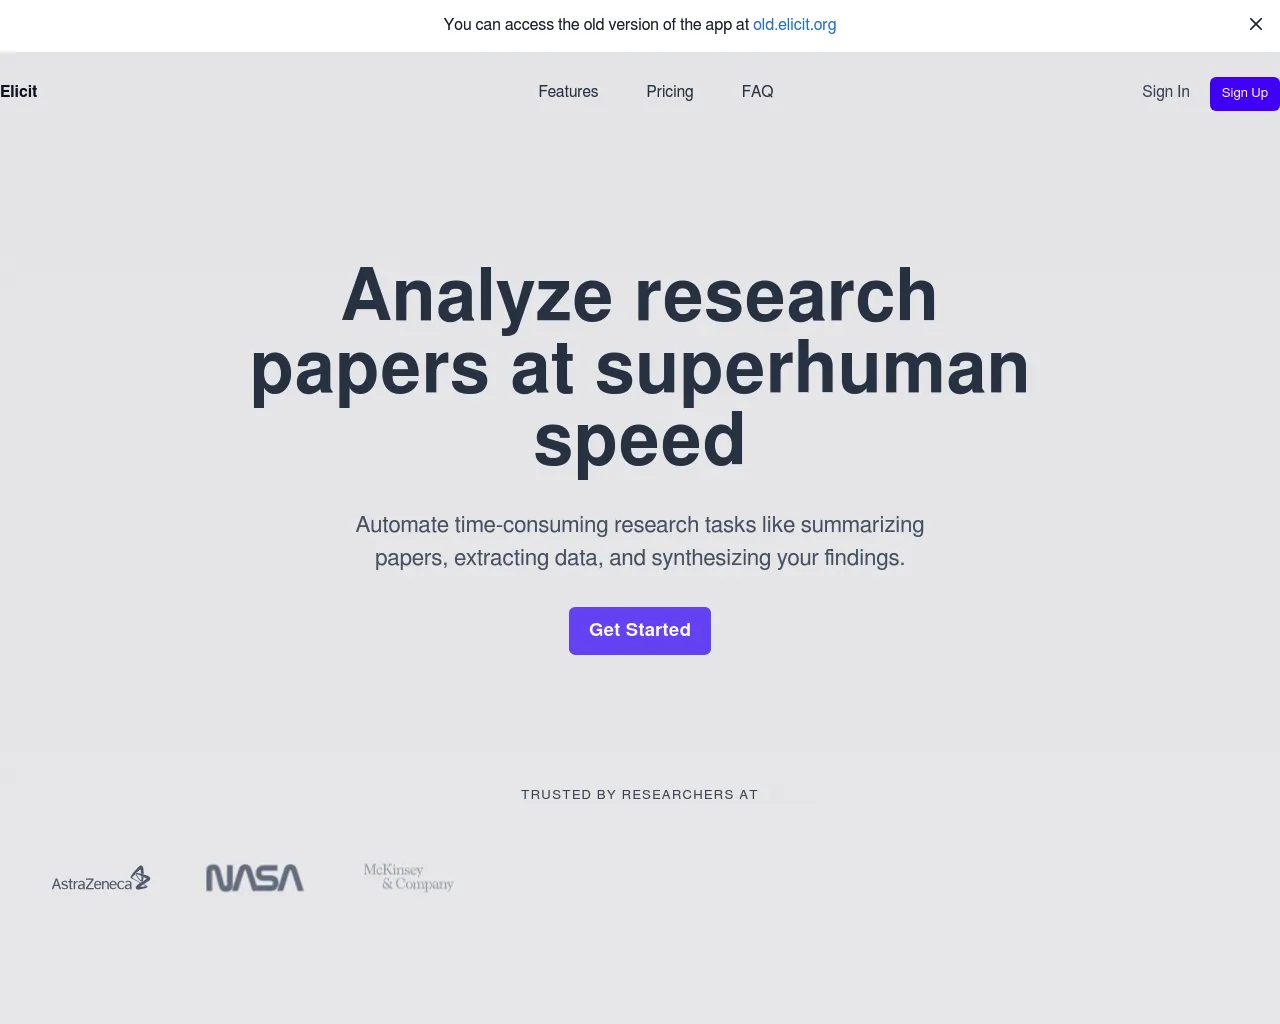 Elicit: The AI Research Assistant